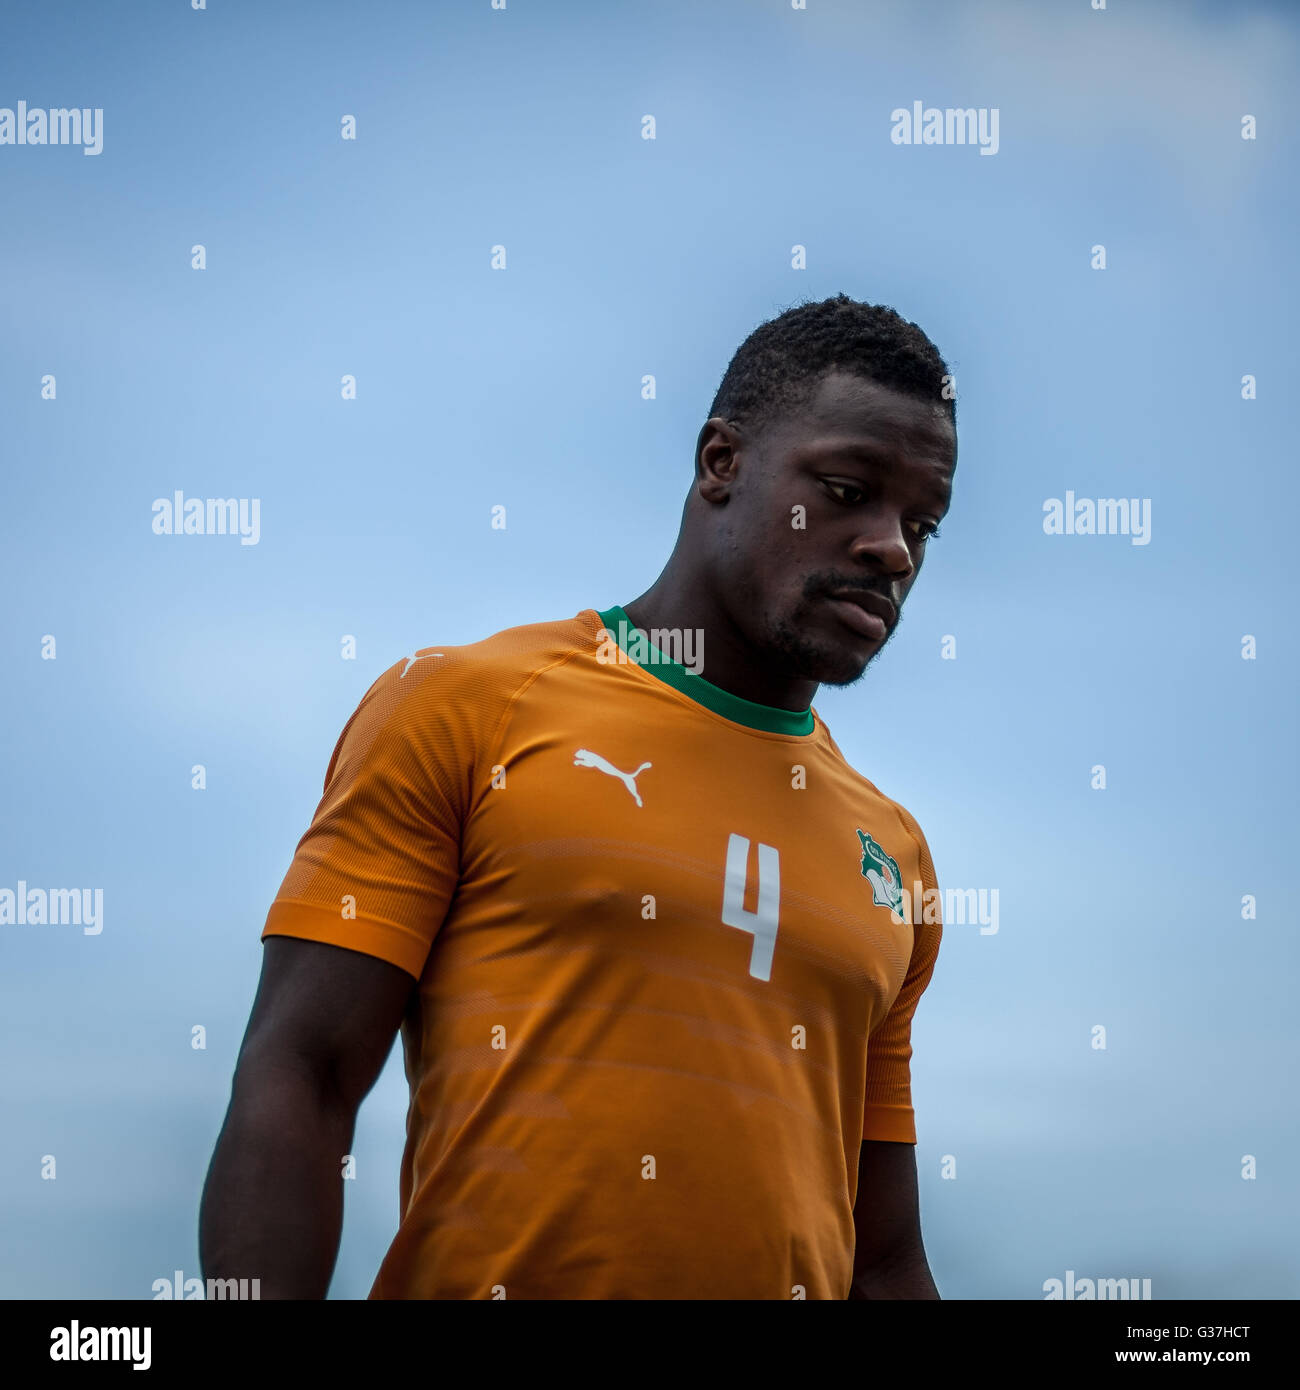 Serge N'Guessan of the Ivory Coast national football team 'The Elephants' during training session in Abidjan, Ivory Coast. Stock Photo